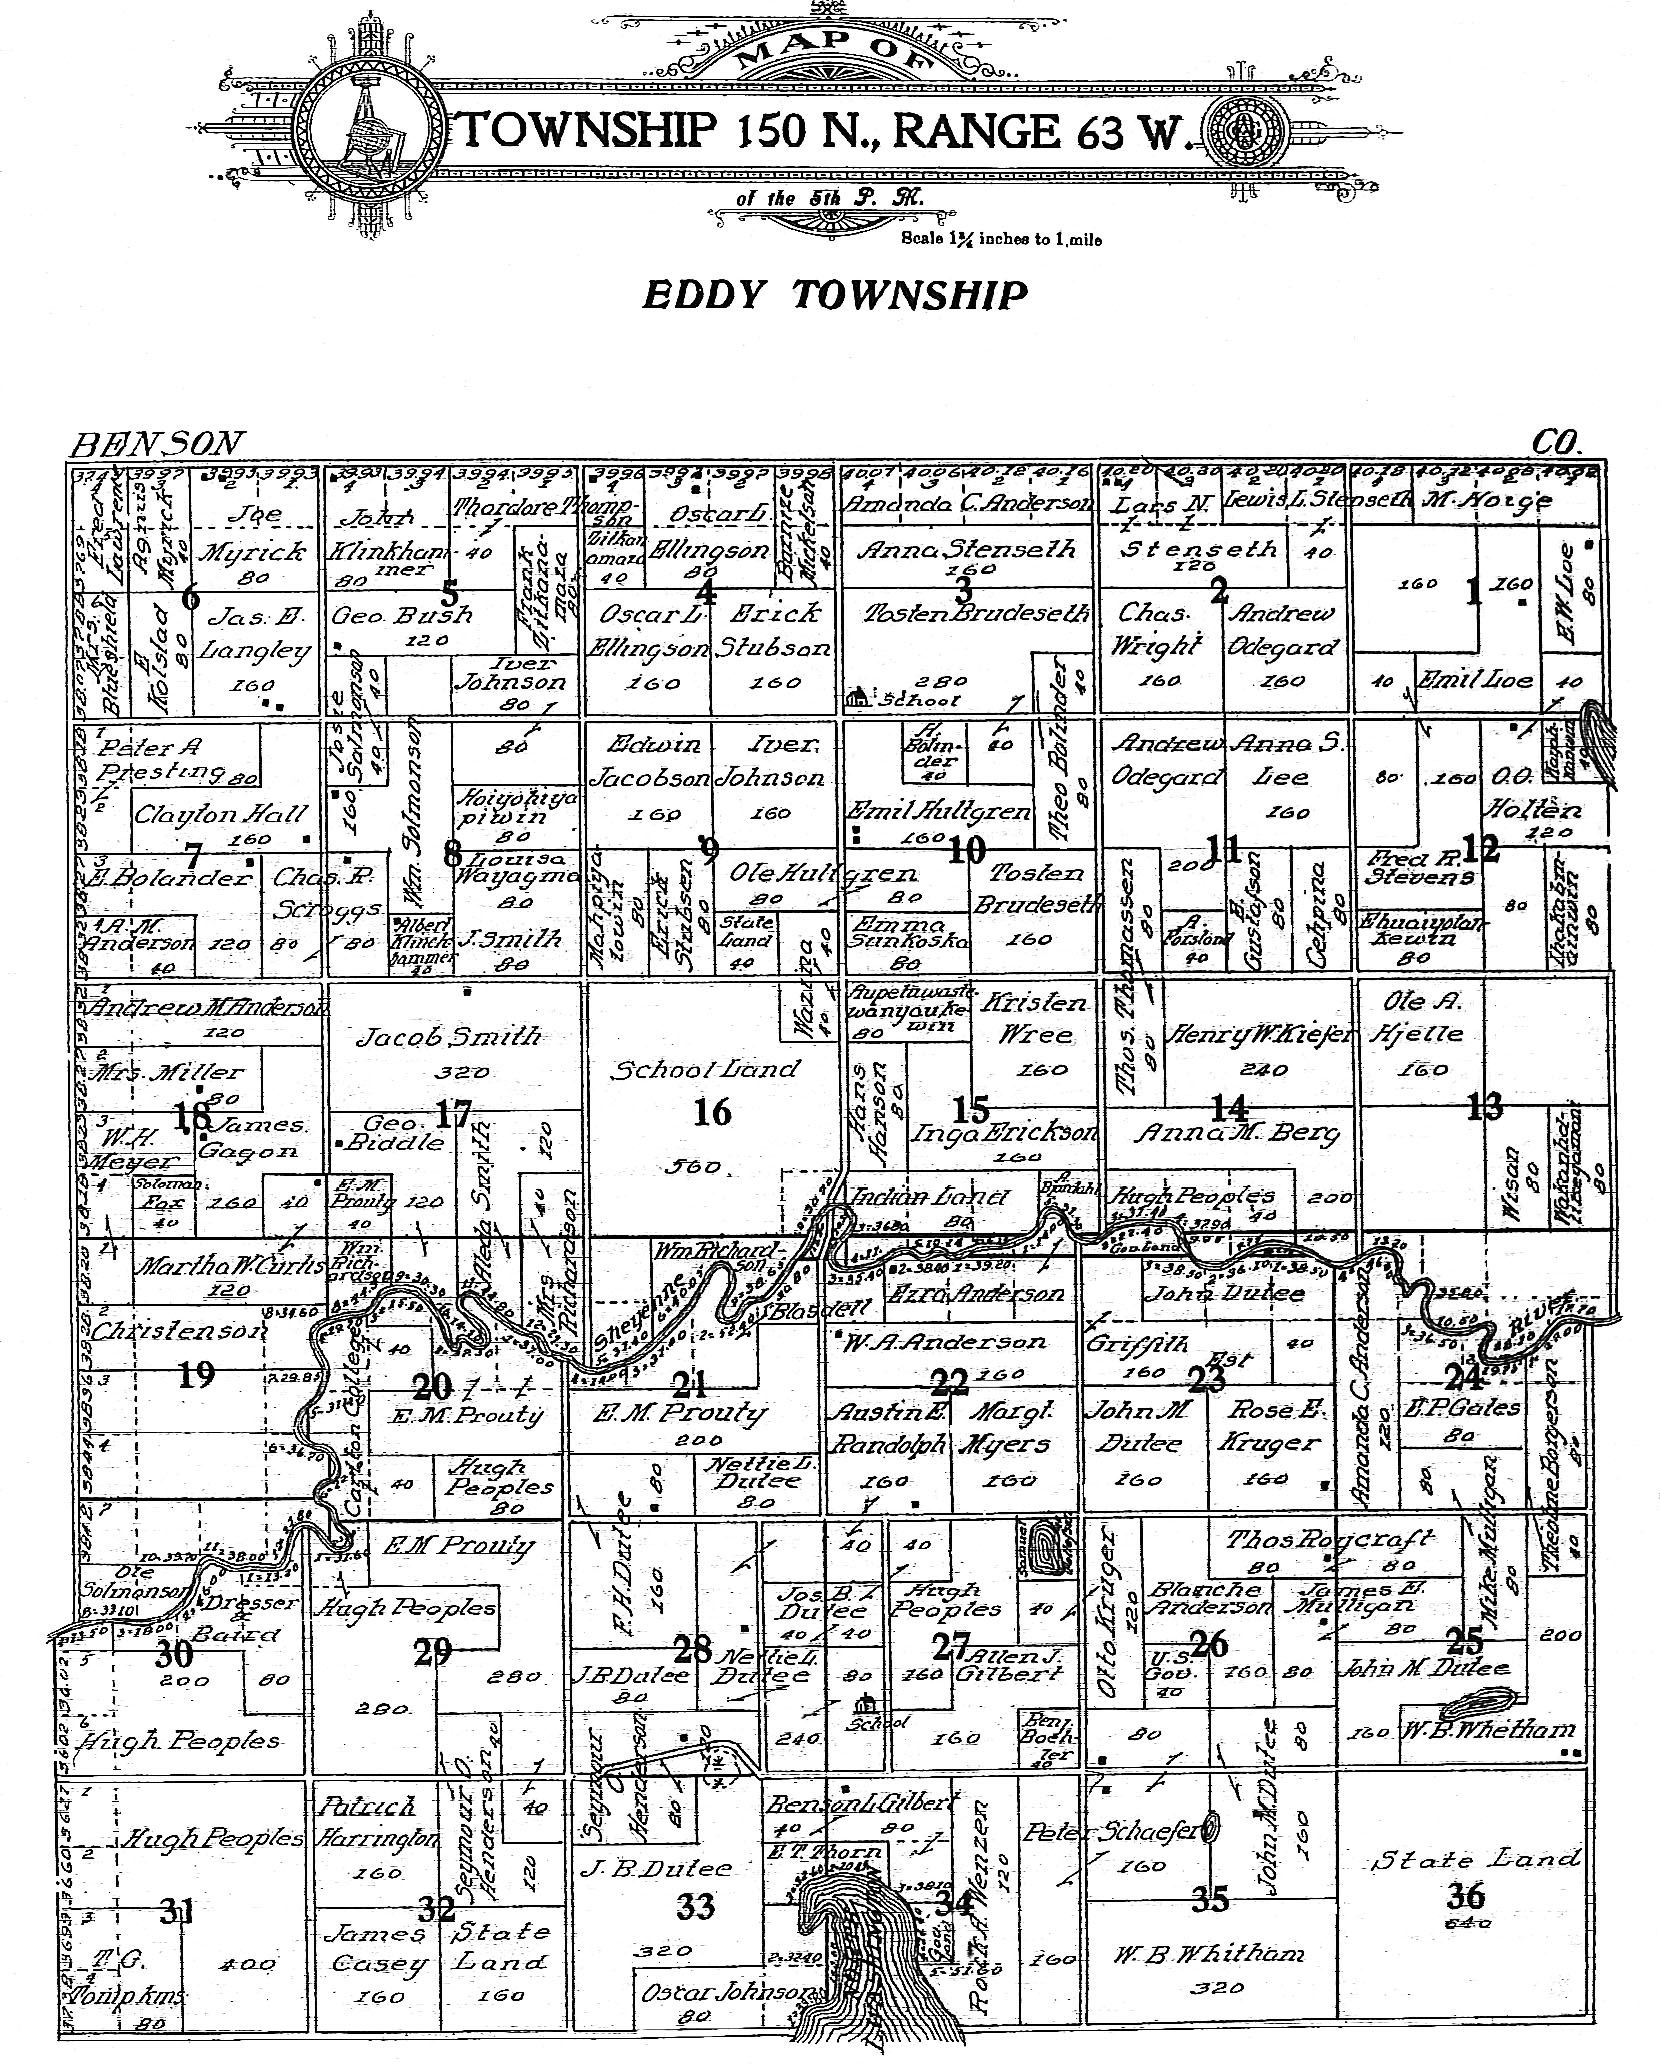 Map 2: Plat Map of Eddy Township, 1910